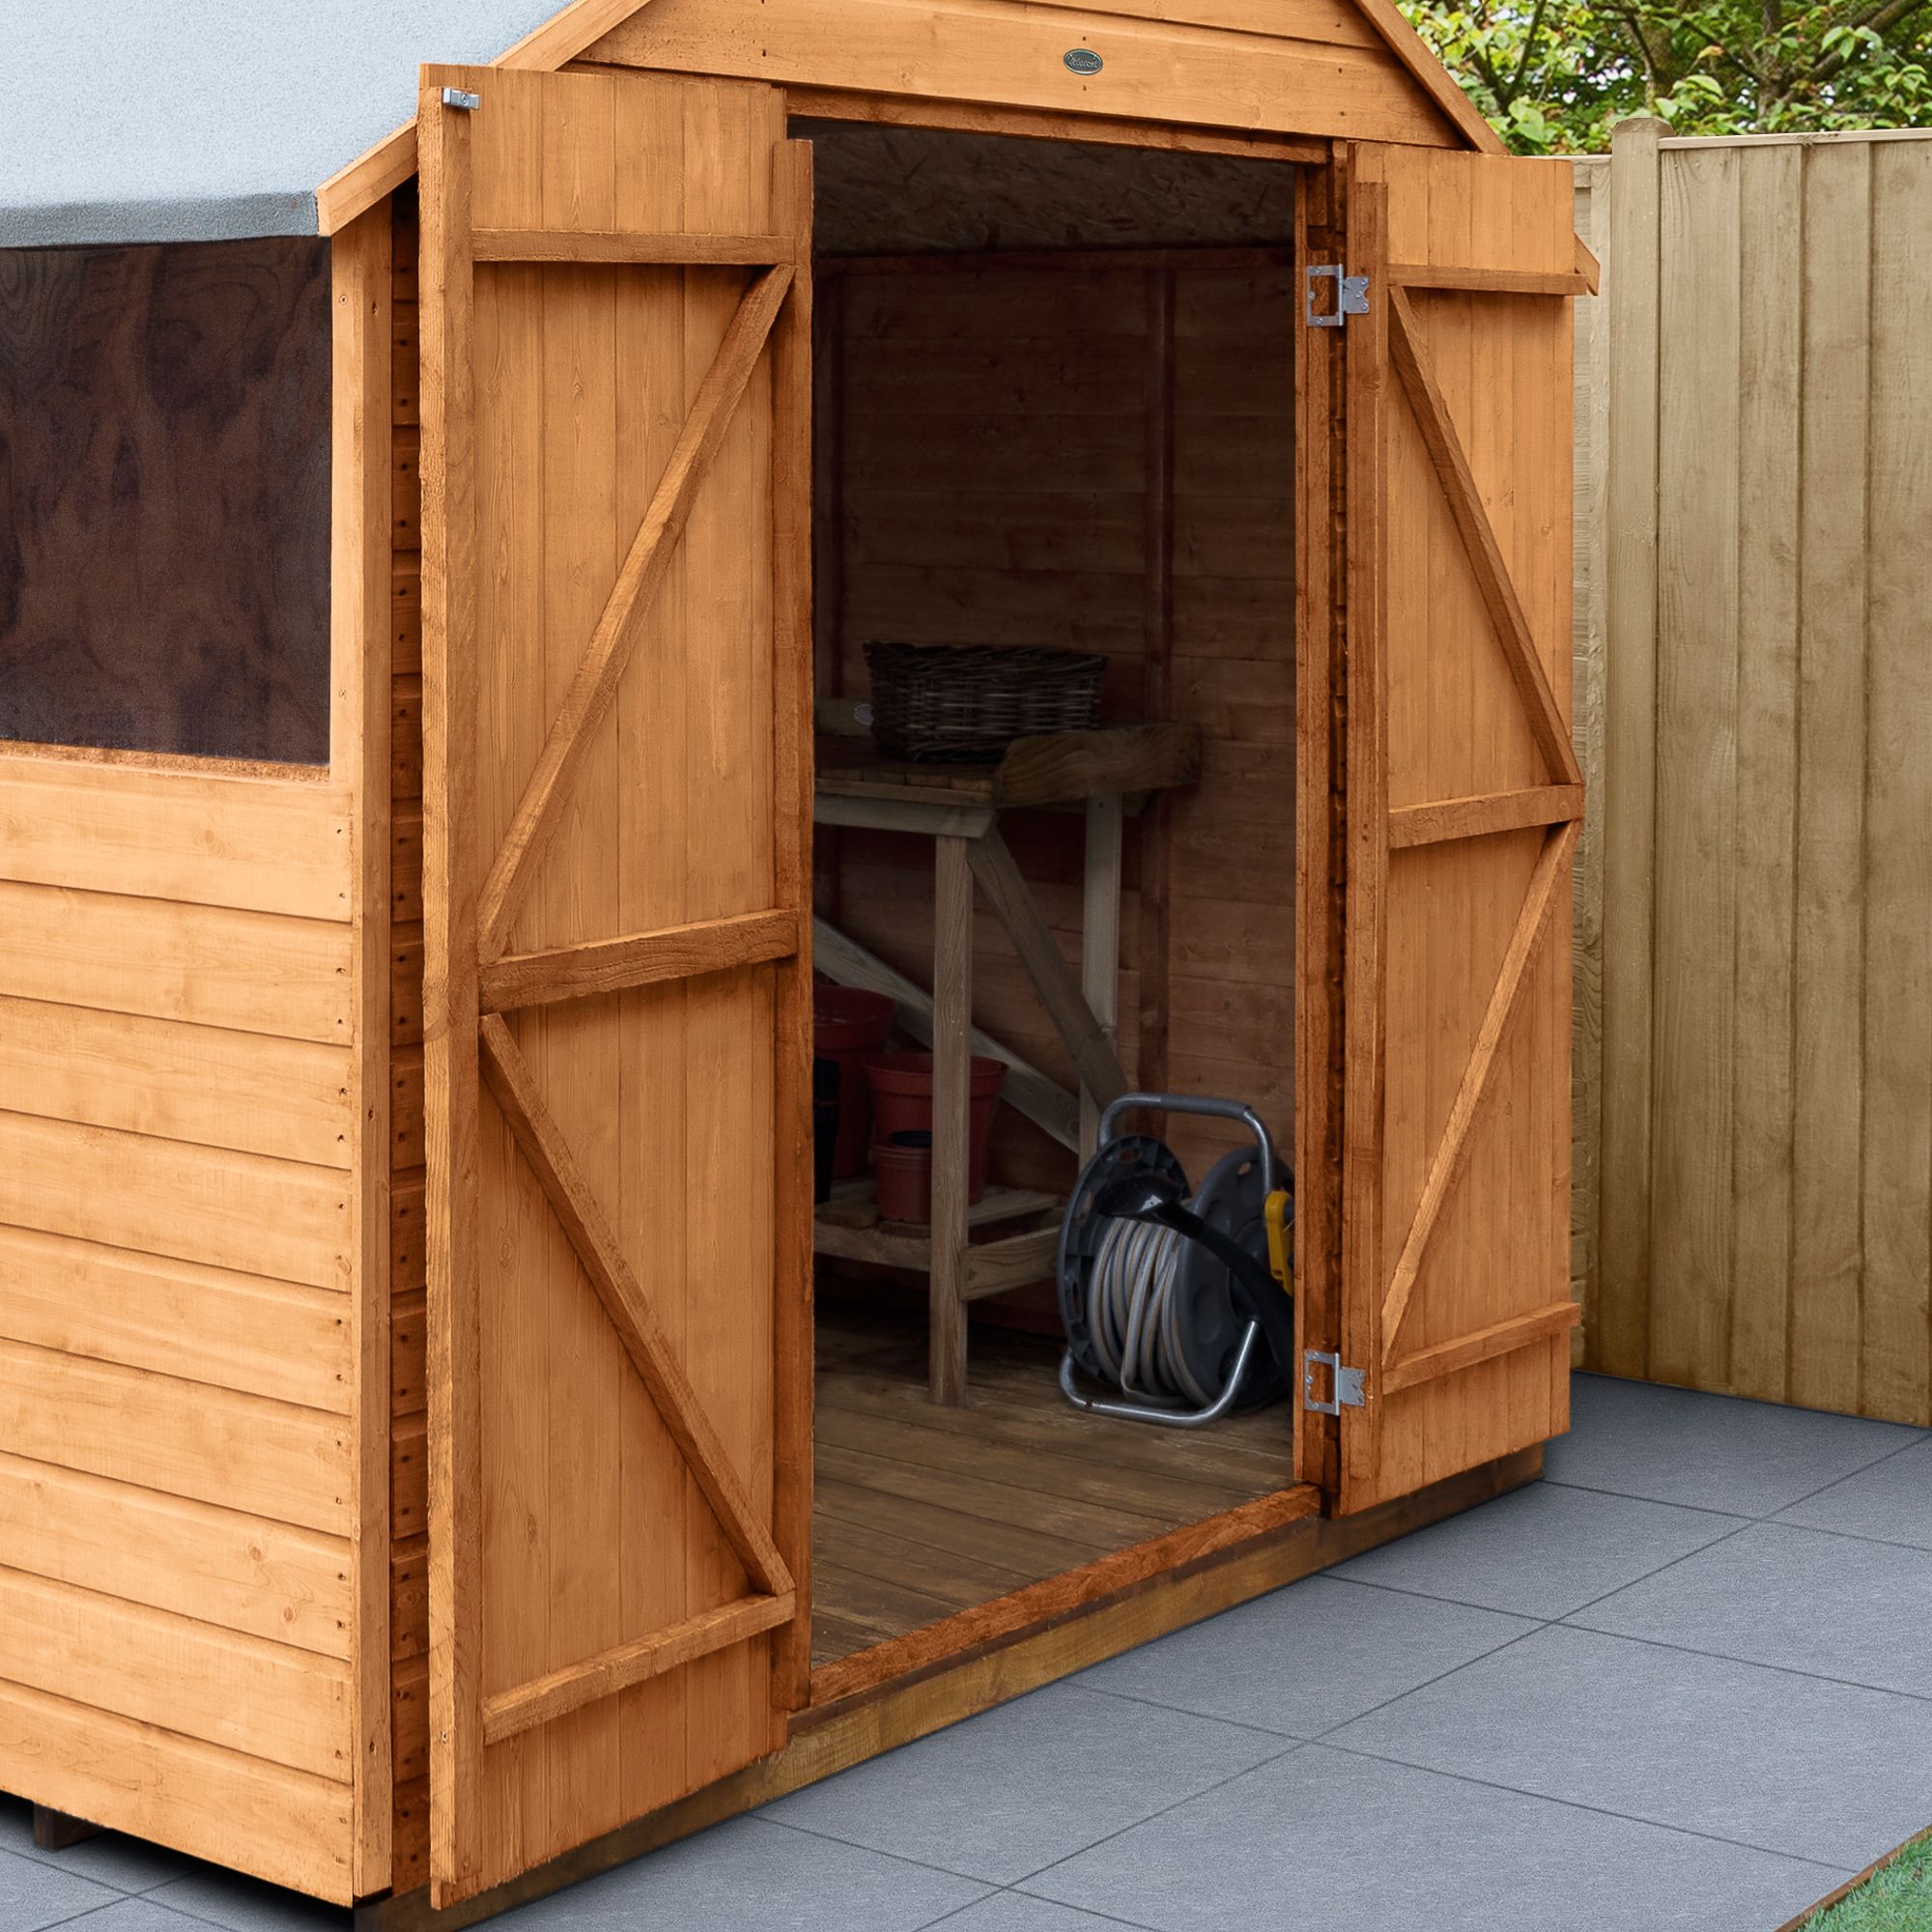 Forest Garden Shiplap 7x7 ft Apex Wooden 2 door Shed with floor (Base included) - Assembly service included